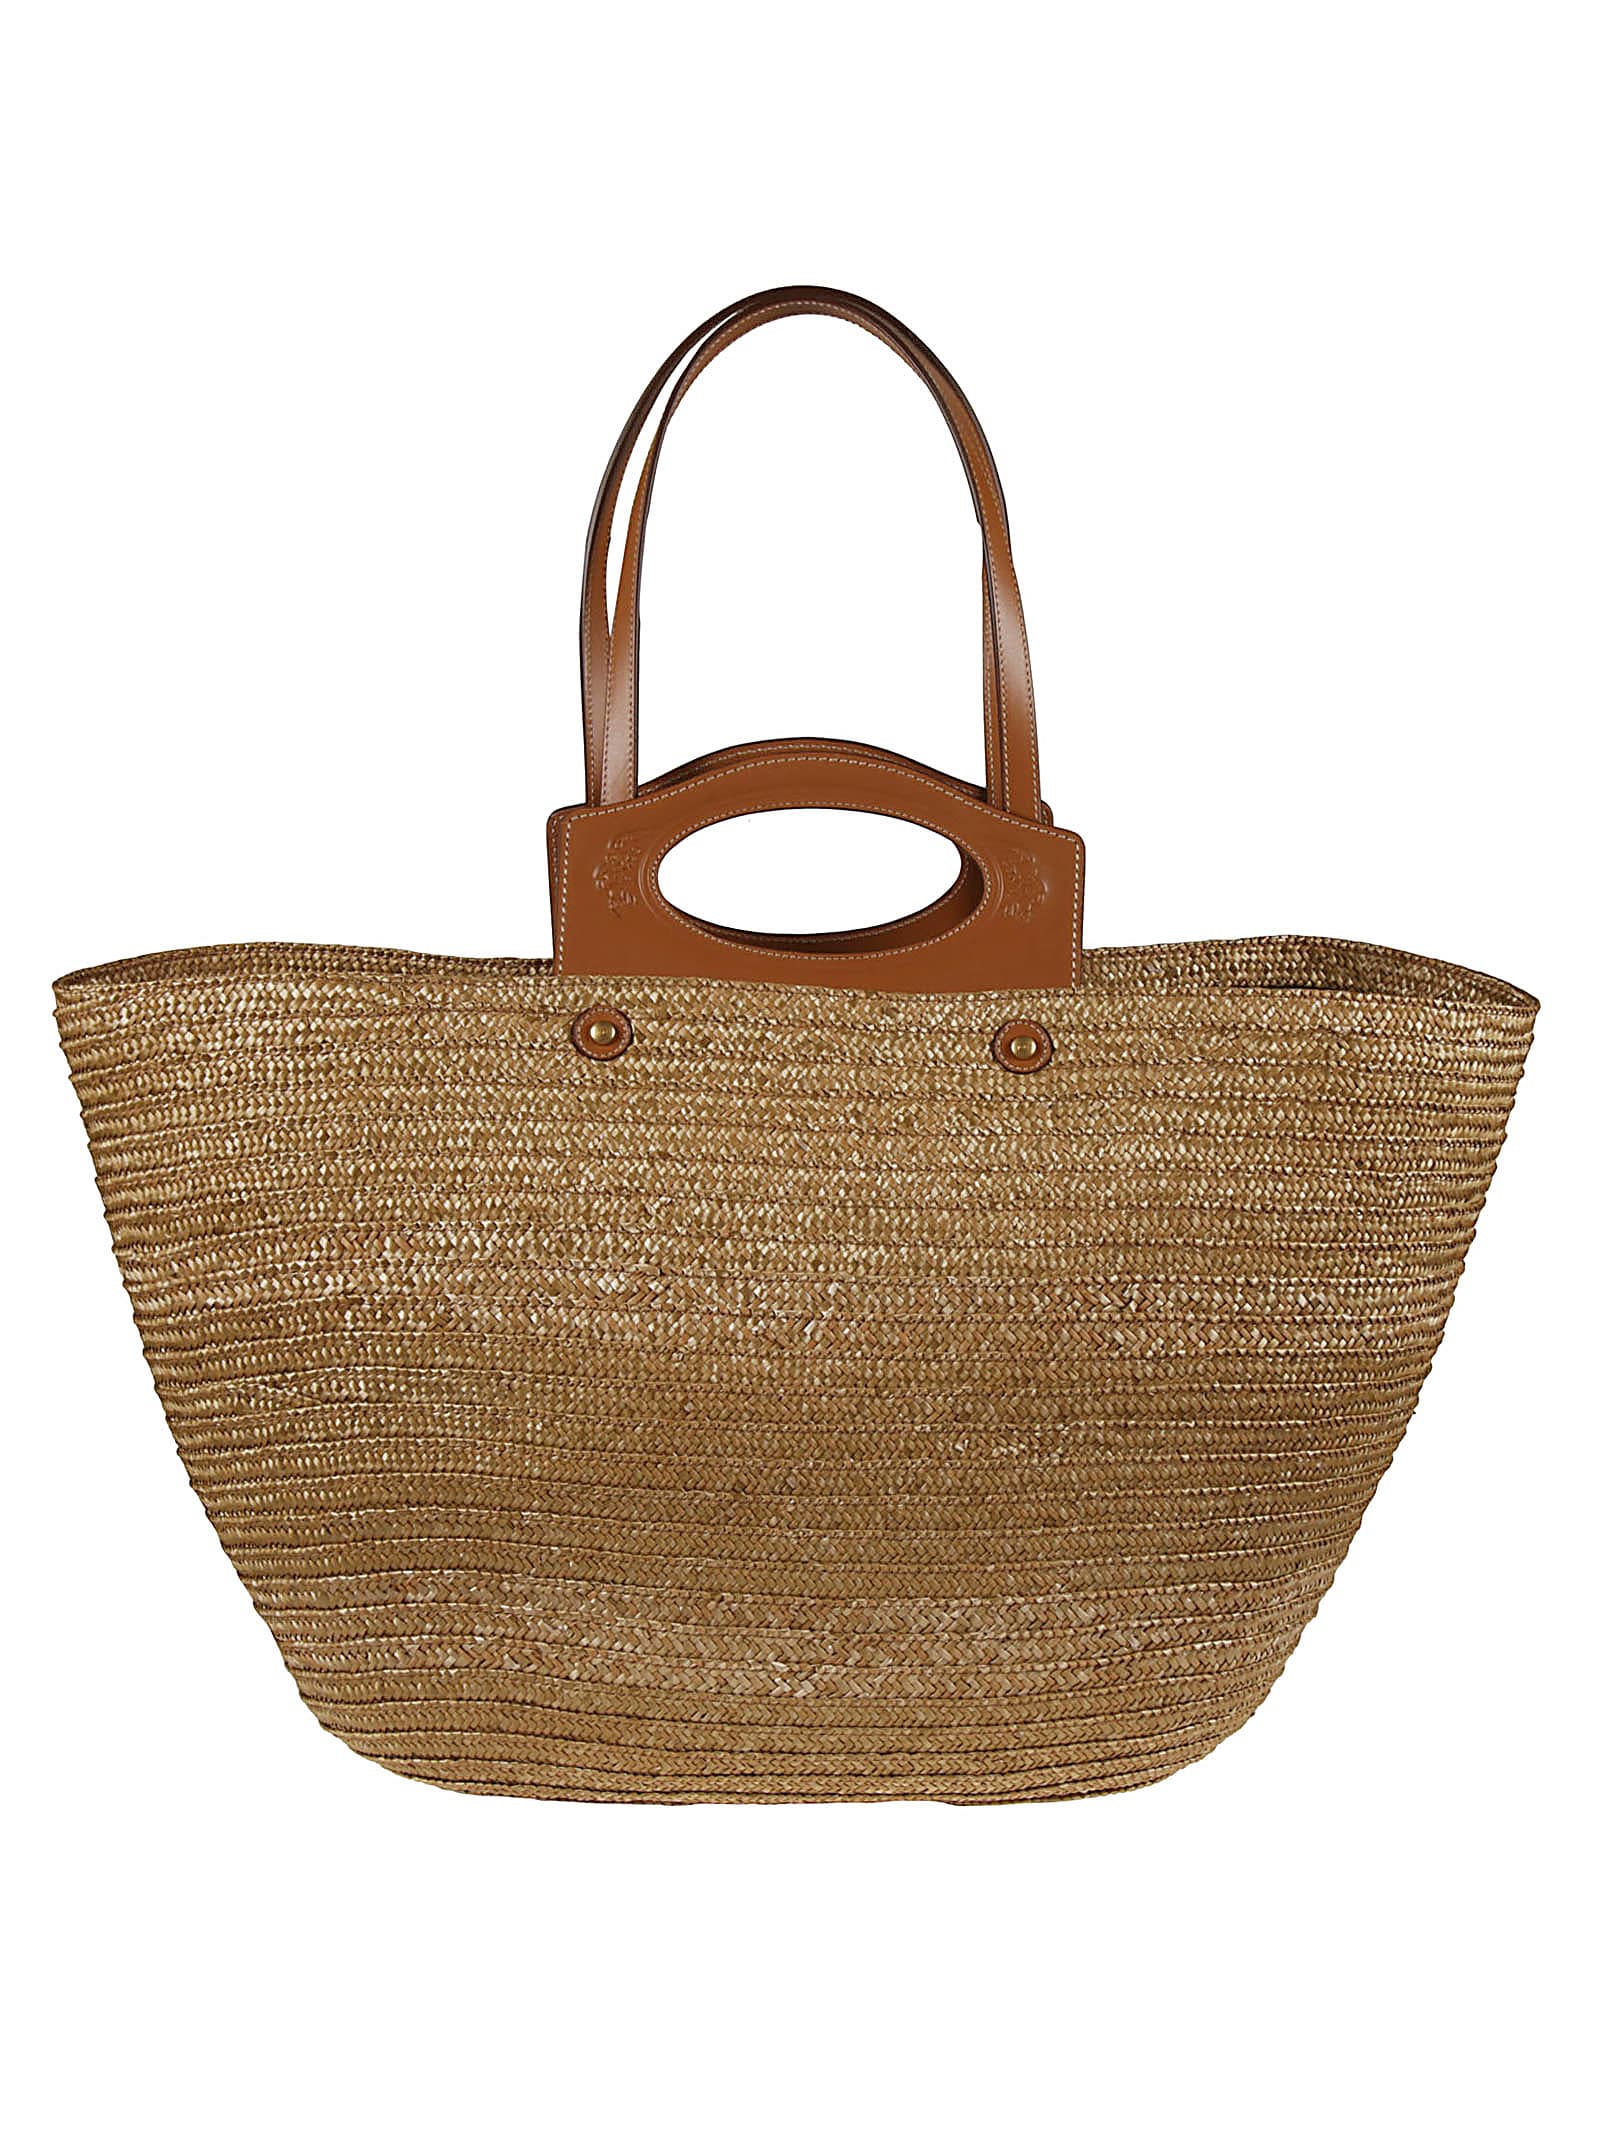 Tods Top Handle Woven Tote